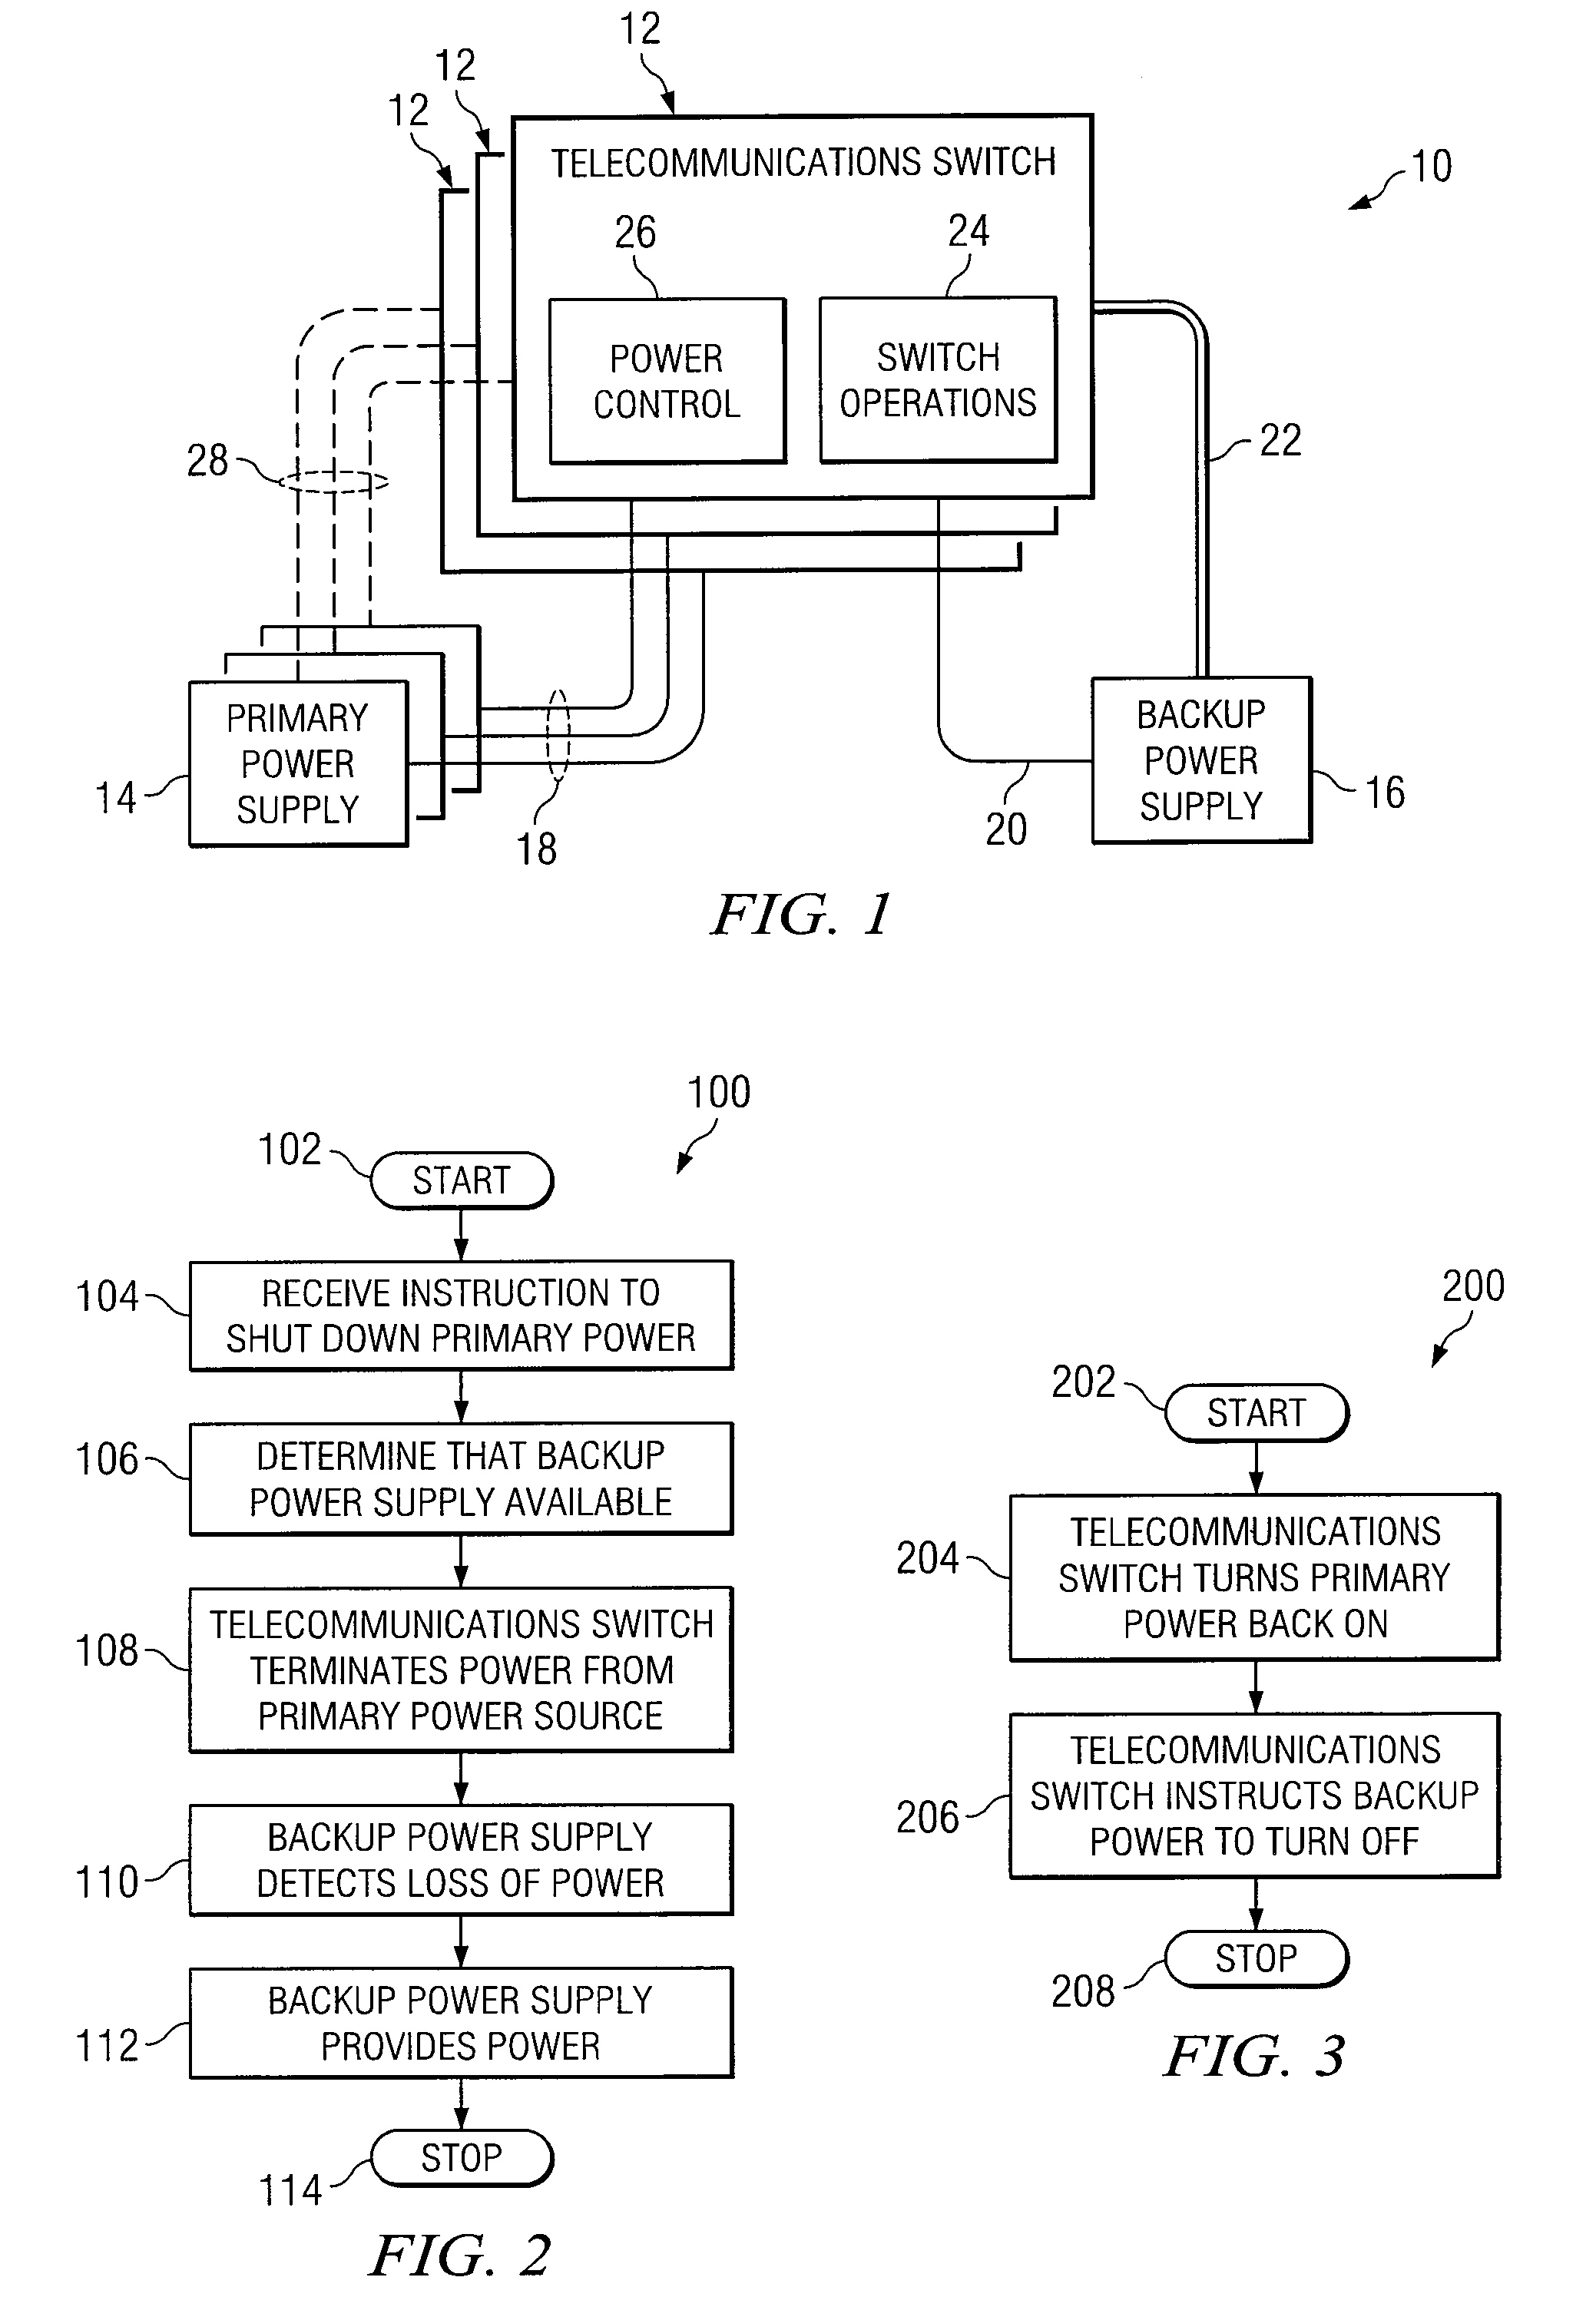 Method and System for Providing Power